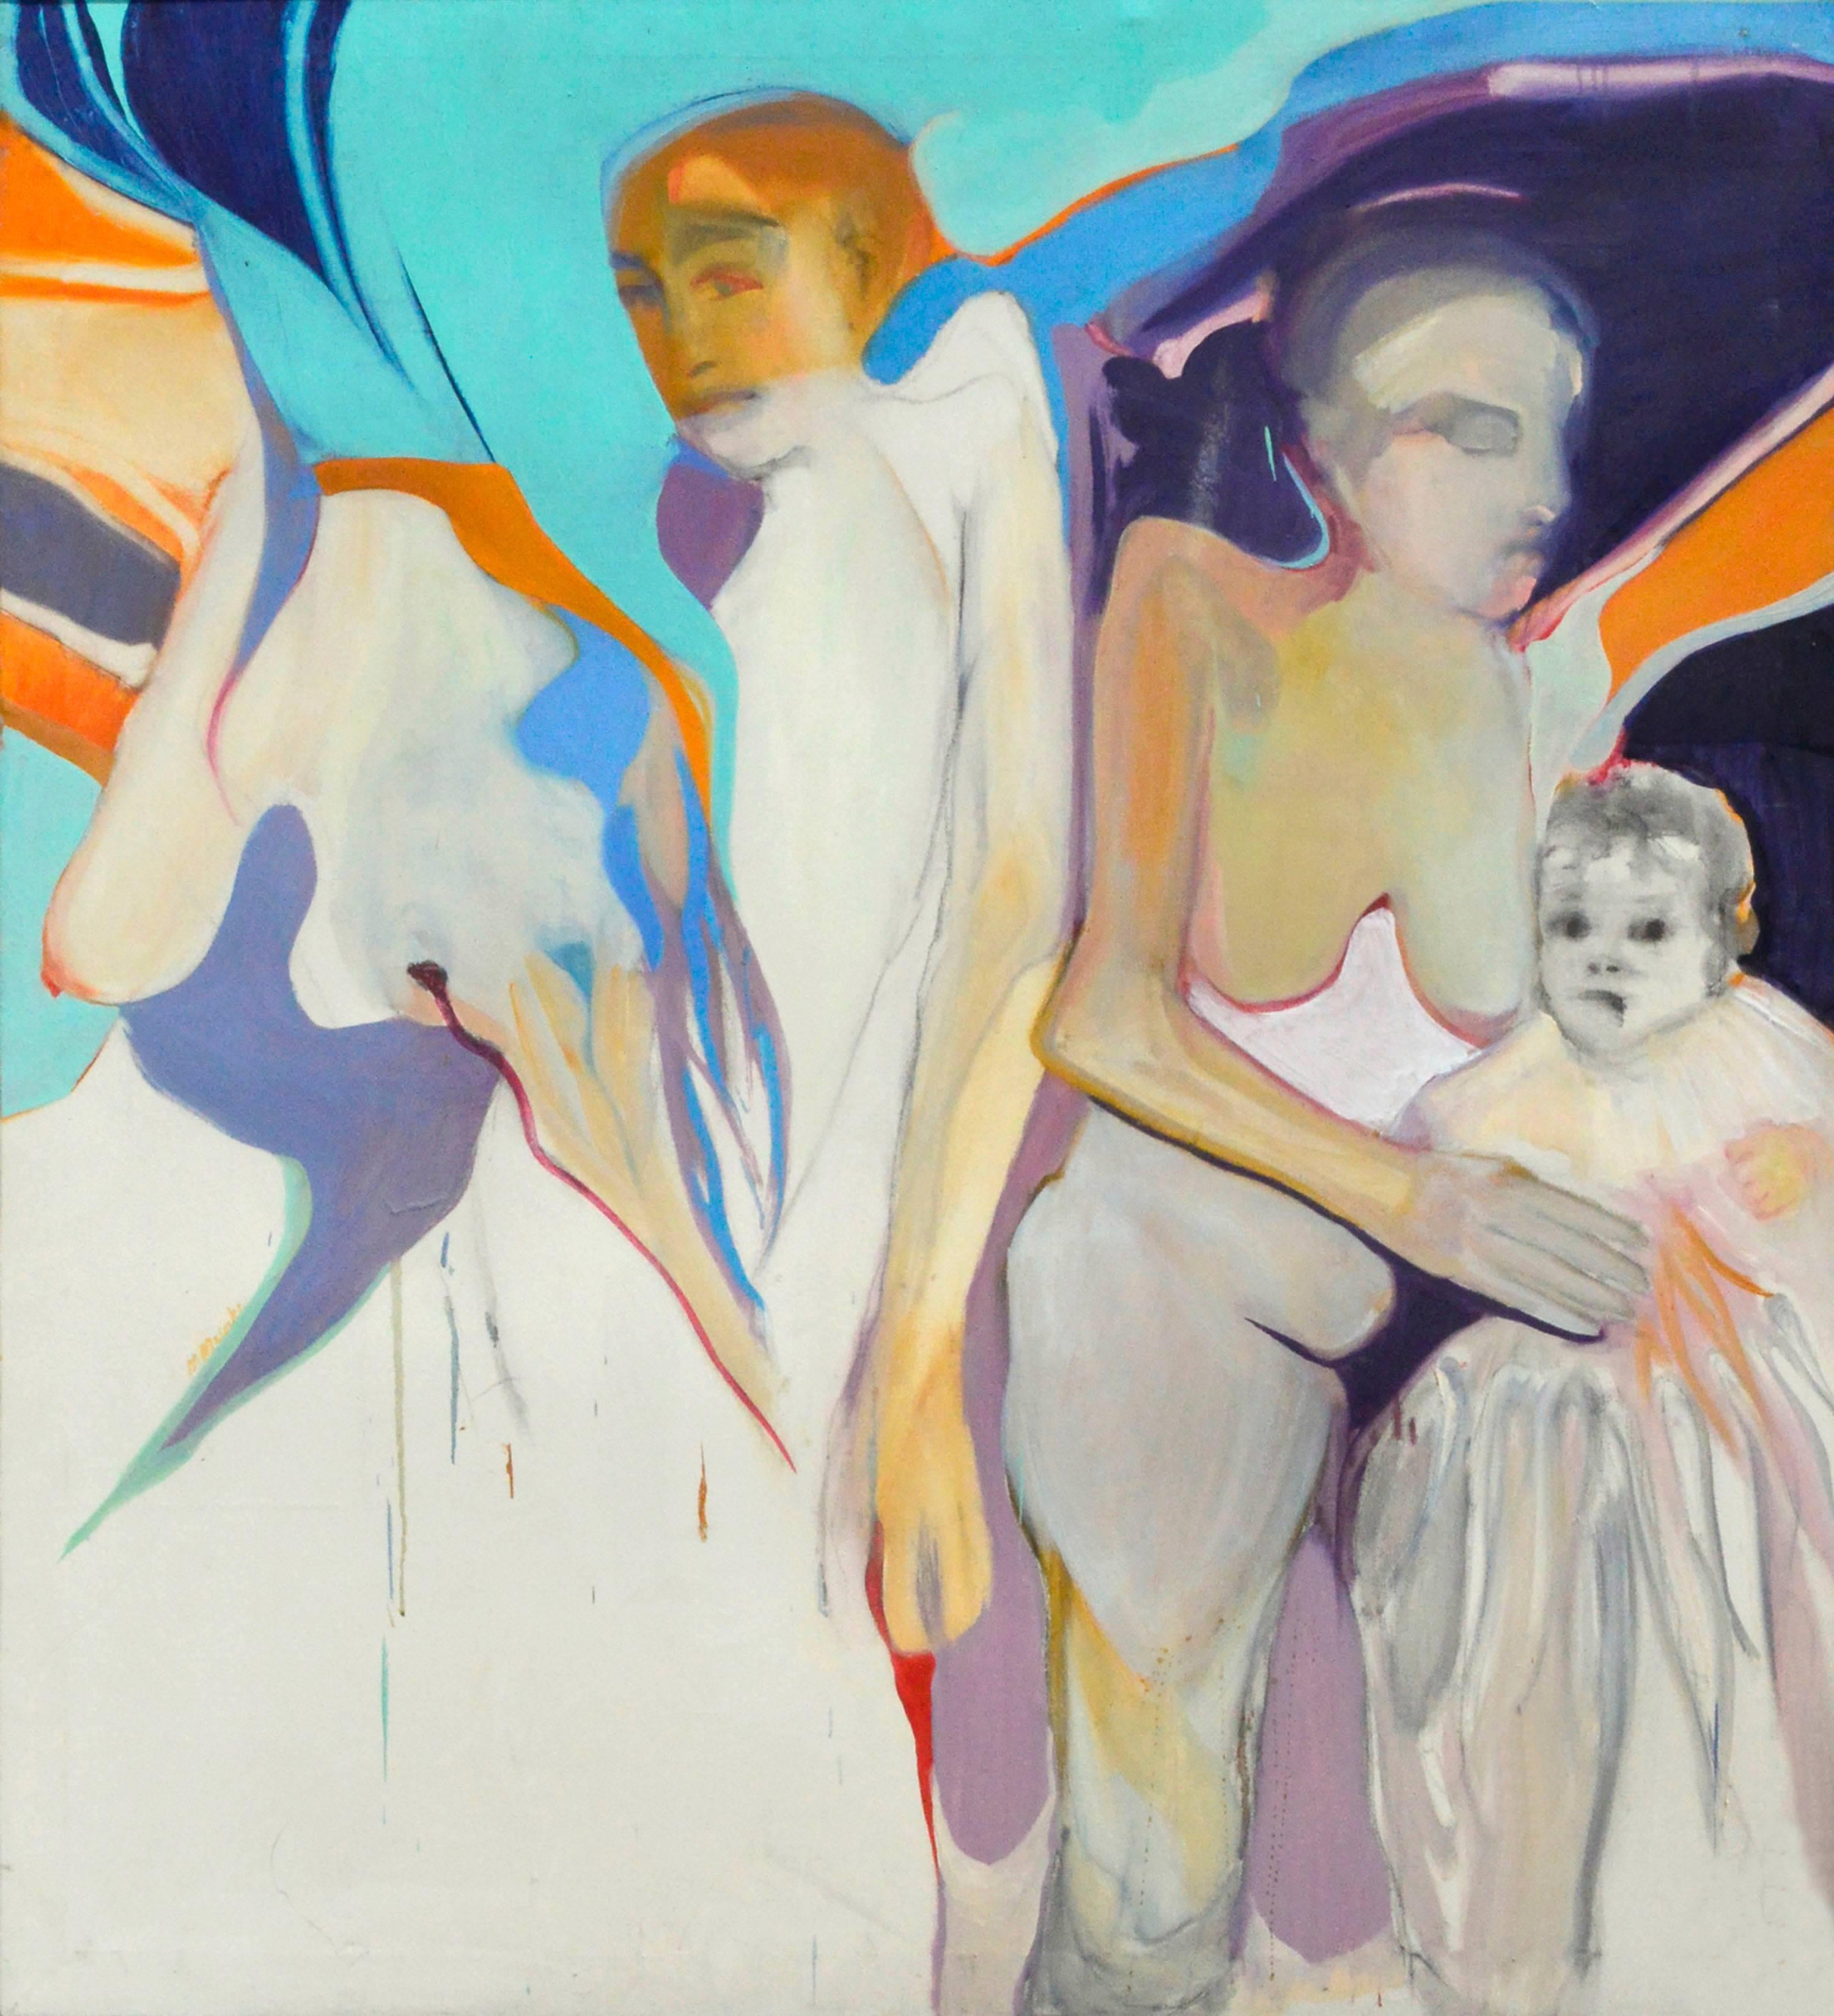 Family Abstract Figurative  - Painting by Marie Sarni